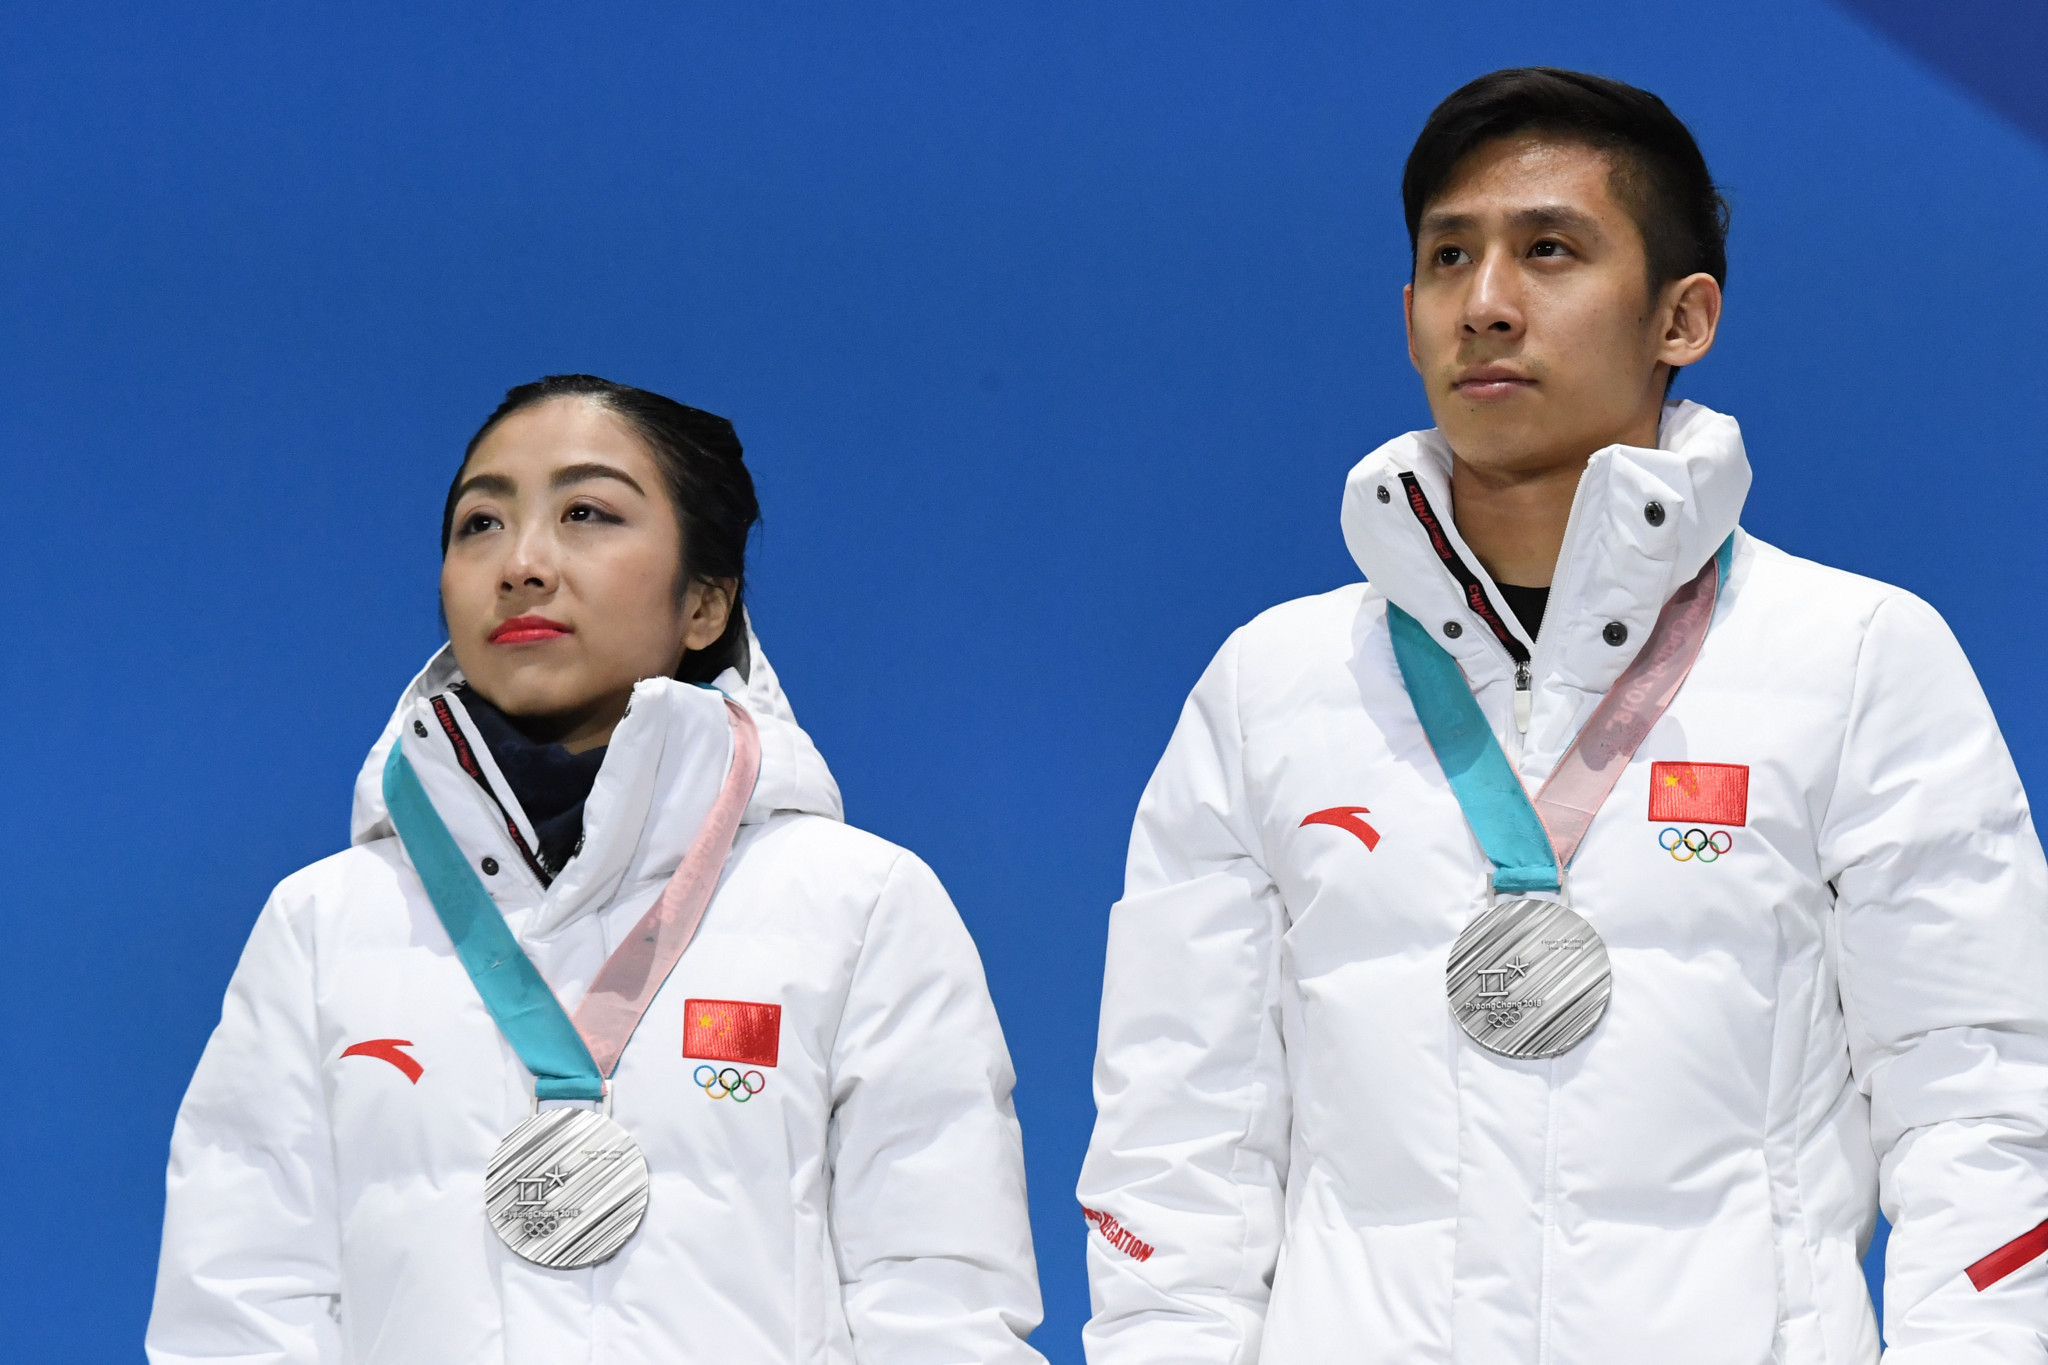 Sui Wenjing and Han Cong win pairs silver at the Pyeongchang 2018 Winter Olympics ©Getty Images